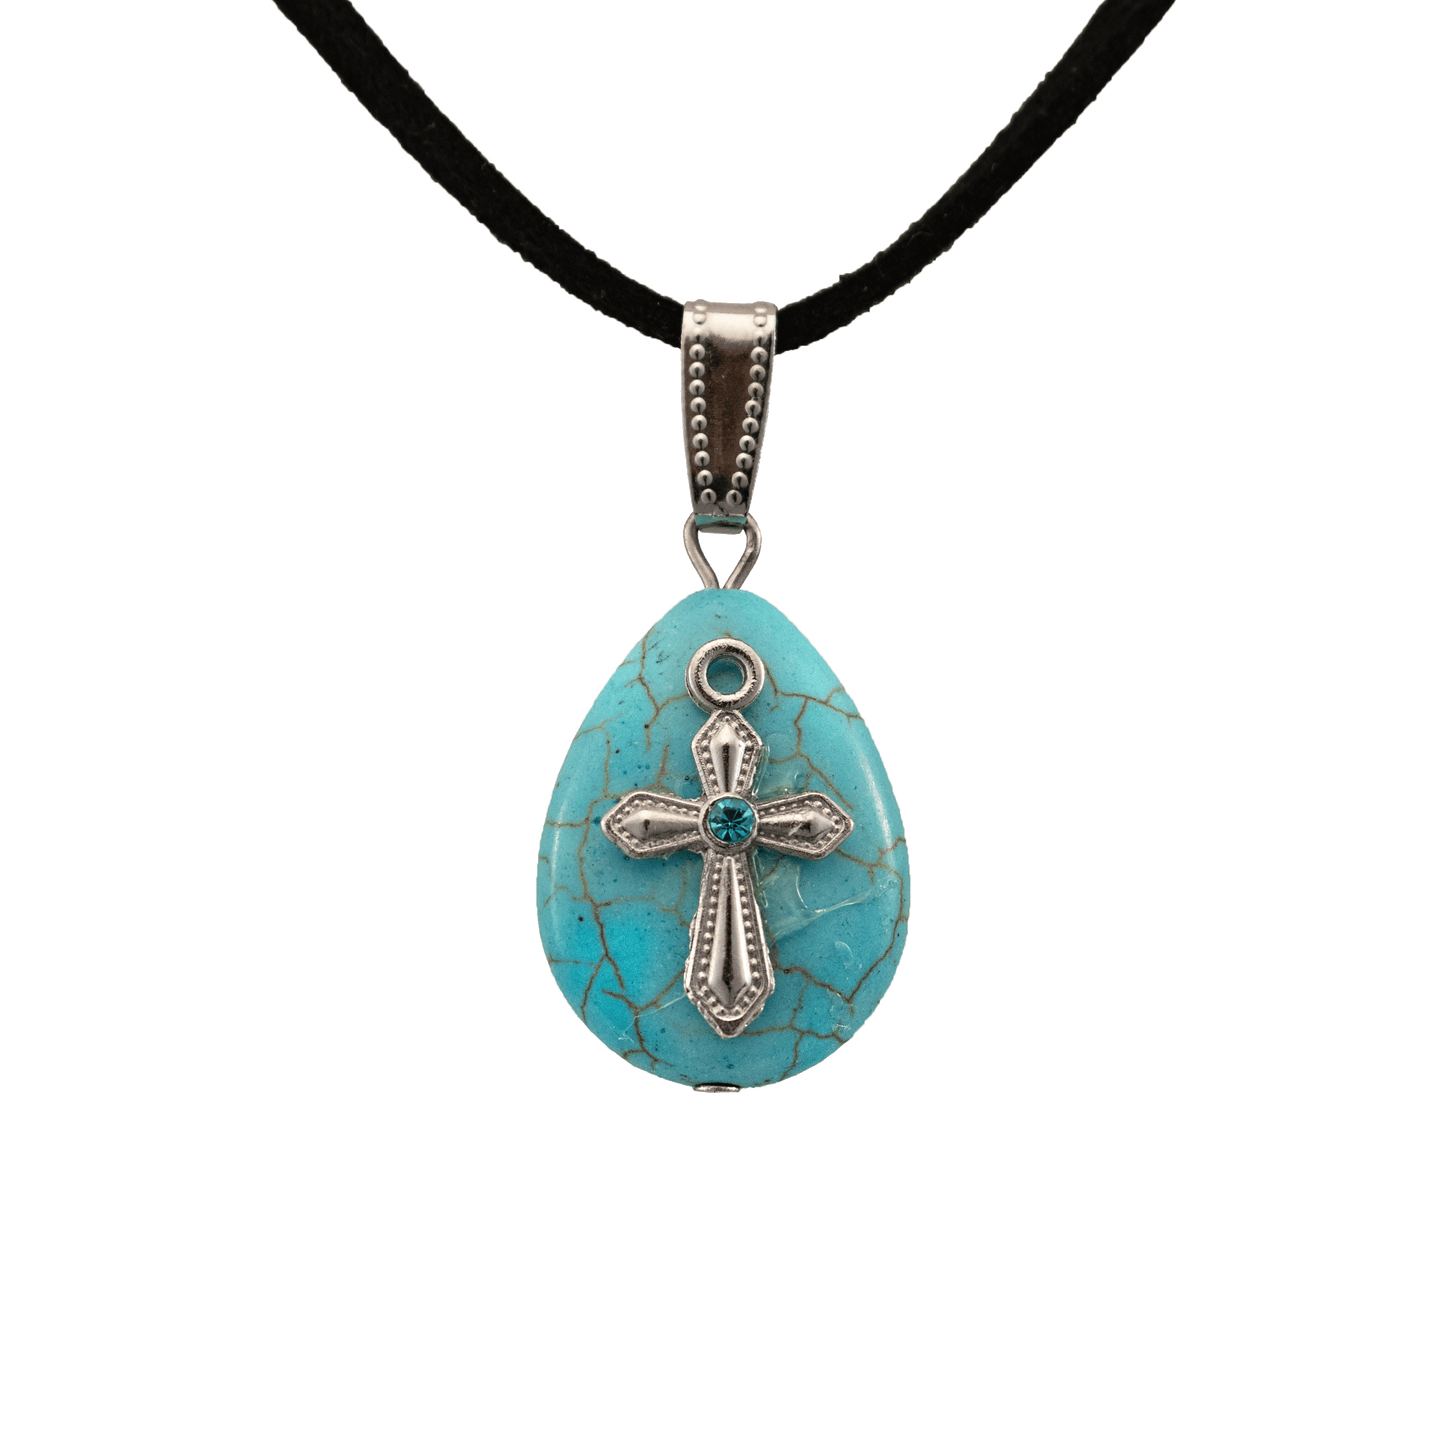 Teardrop Turquoise Howlite pendant with silver cross centered on it and blue jewel on a black cord